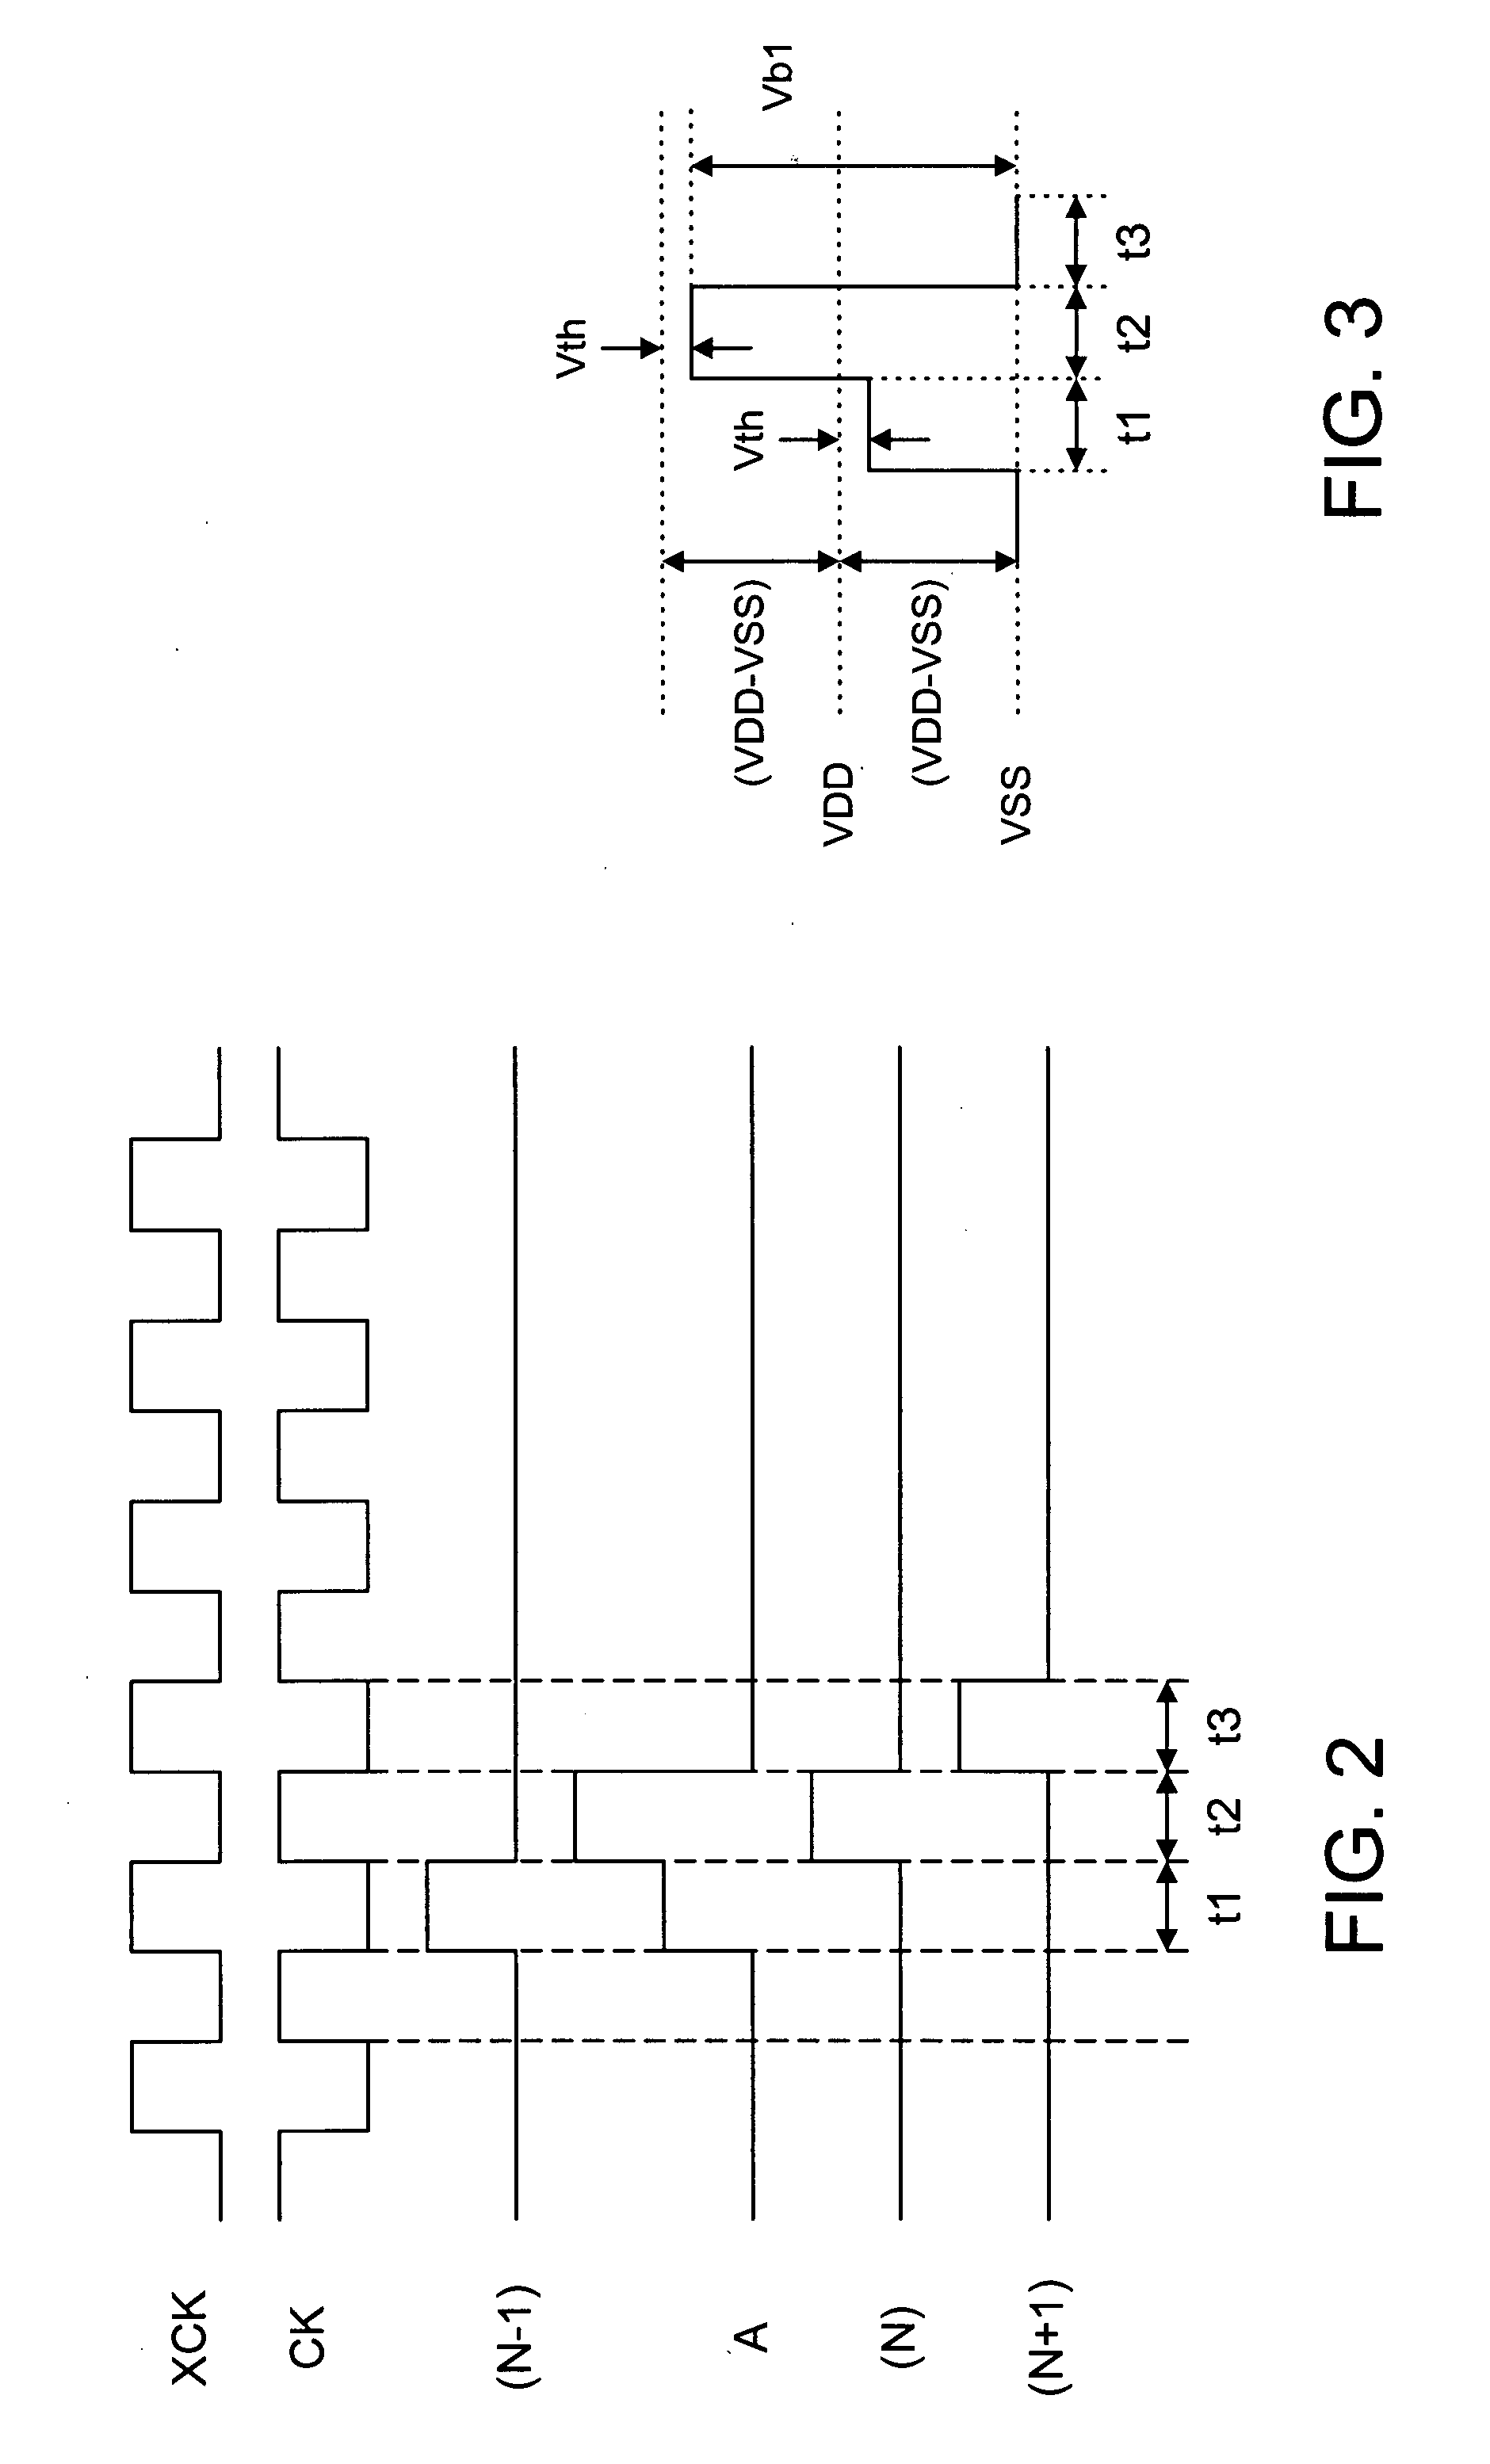 Method and device for reducing voltage stress at bootstrap point in electronic circuits